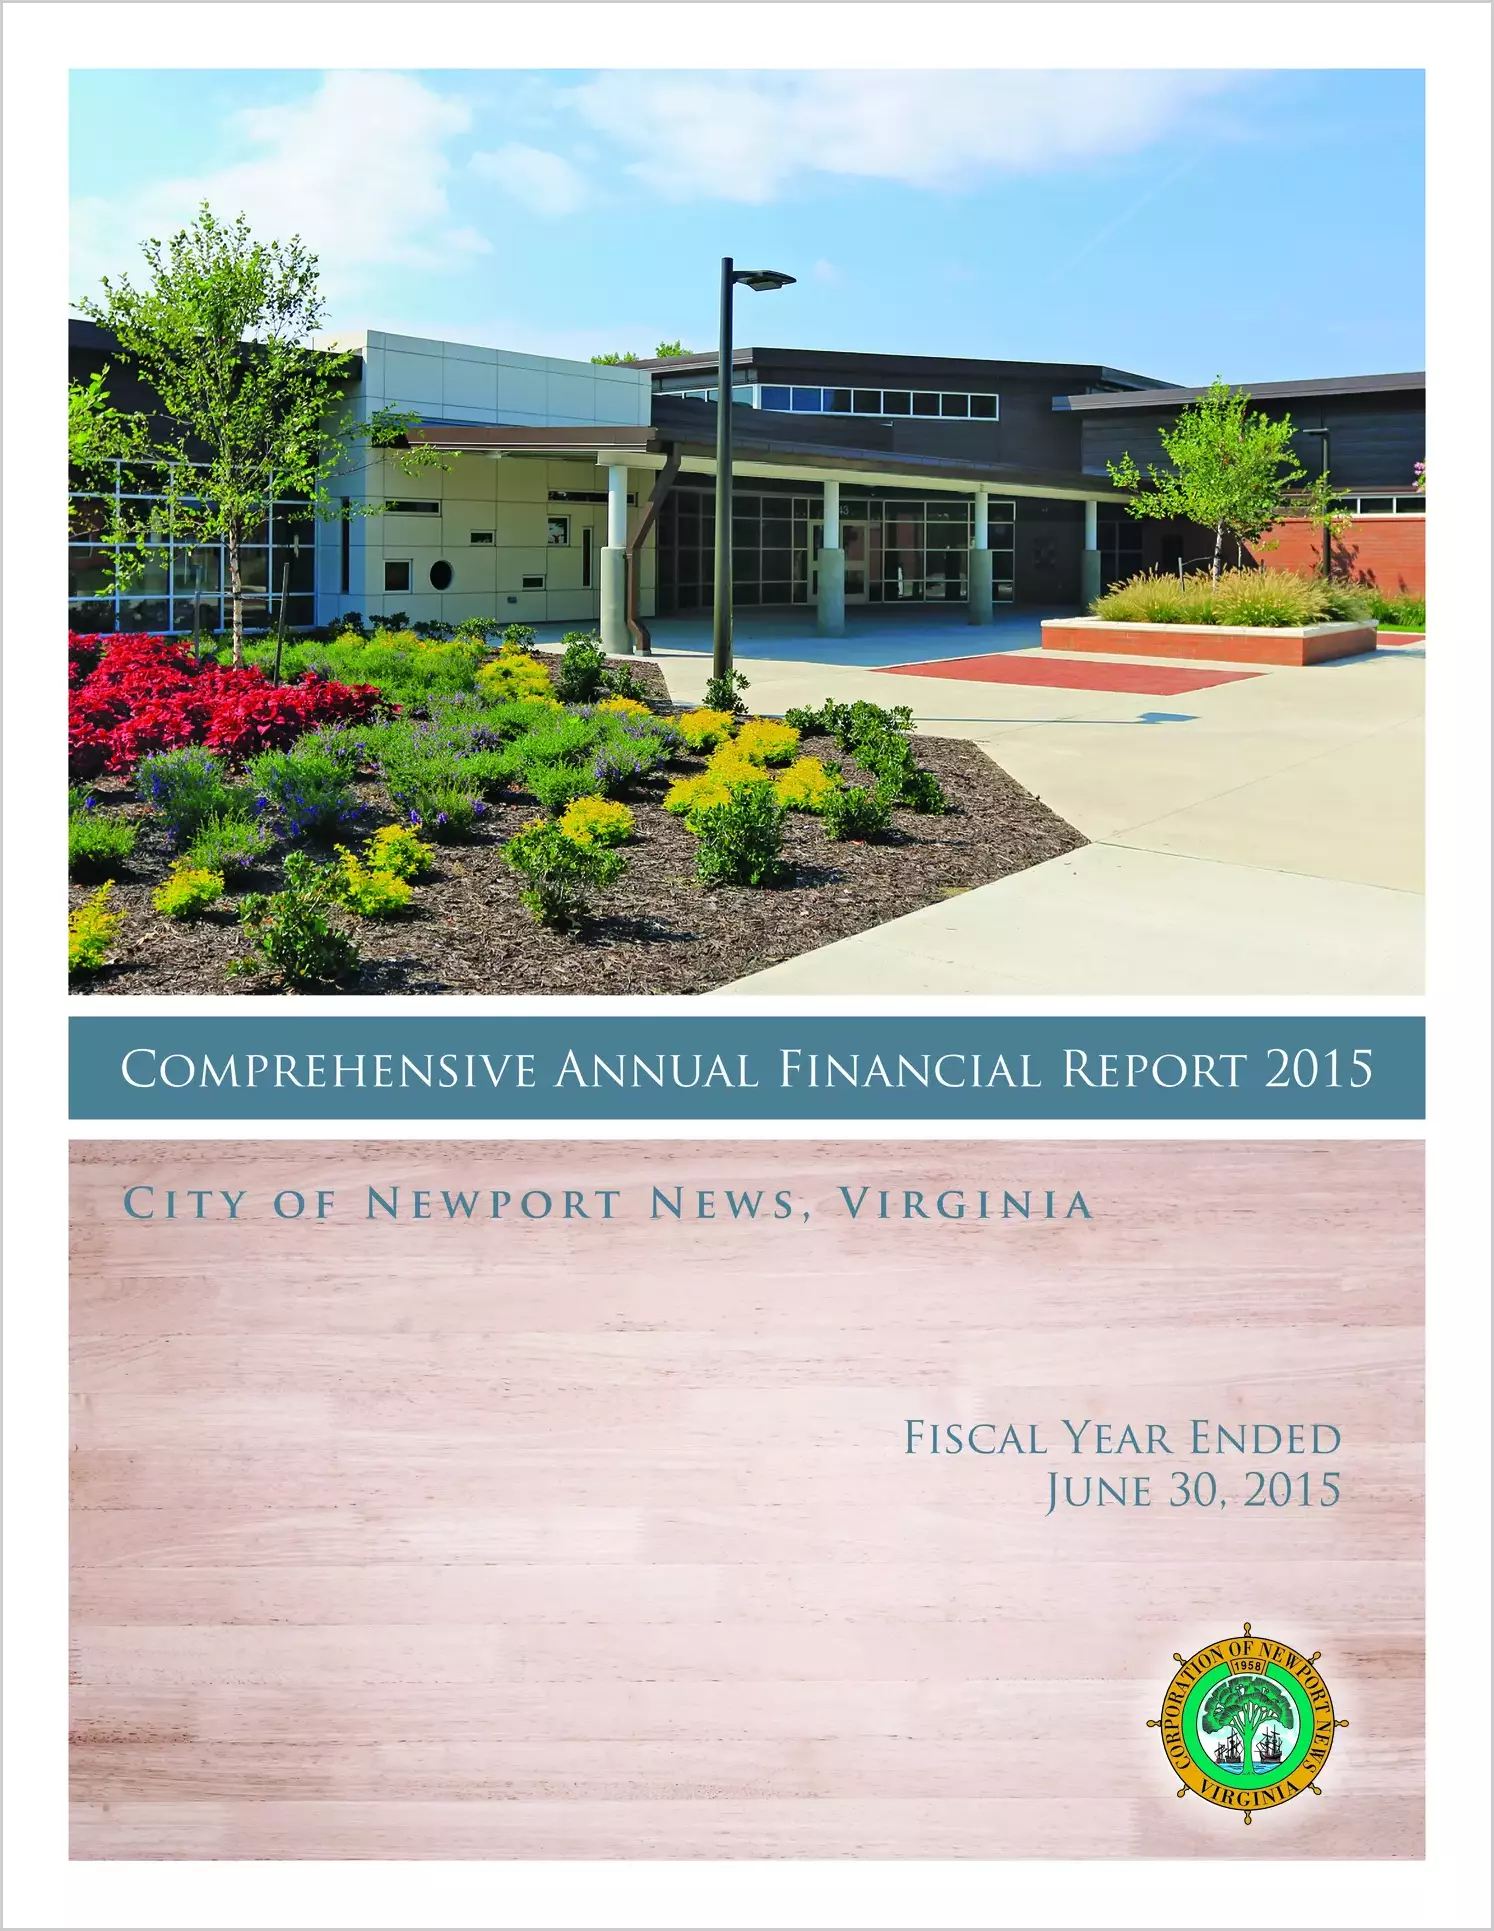 2015 Annual Financial Report for City of Newport News